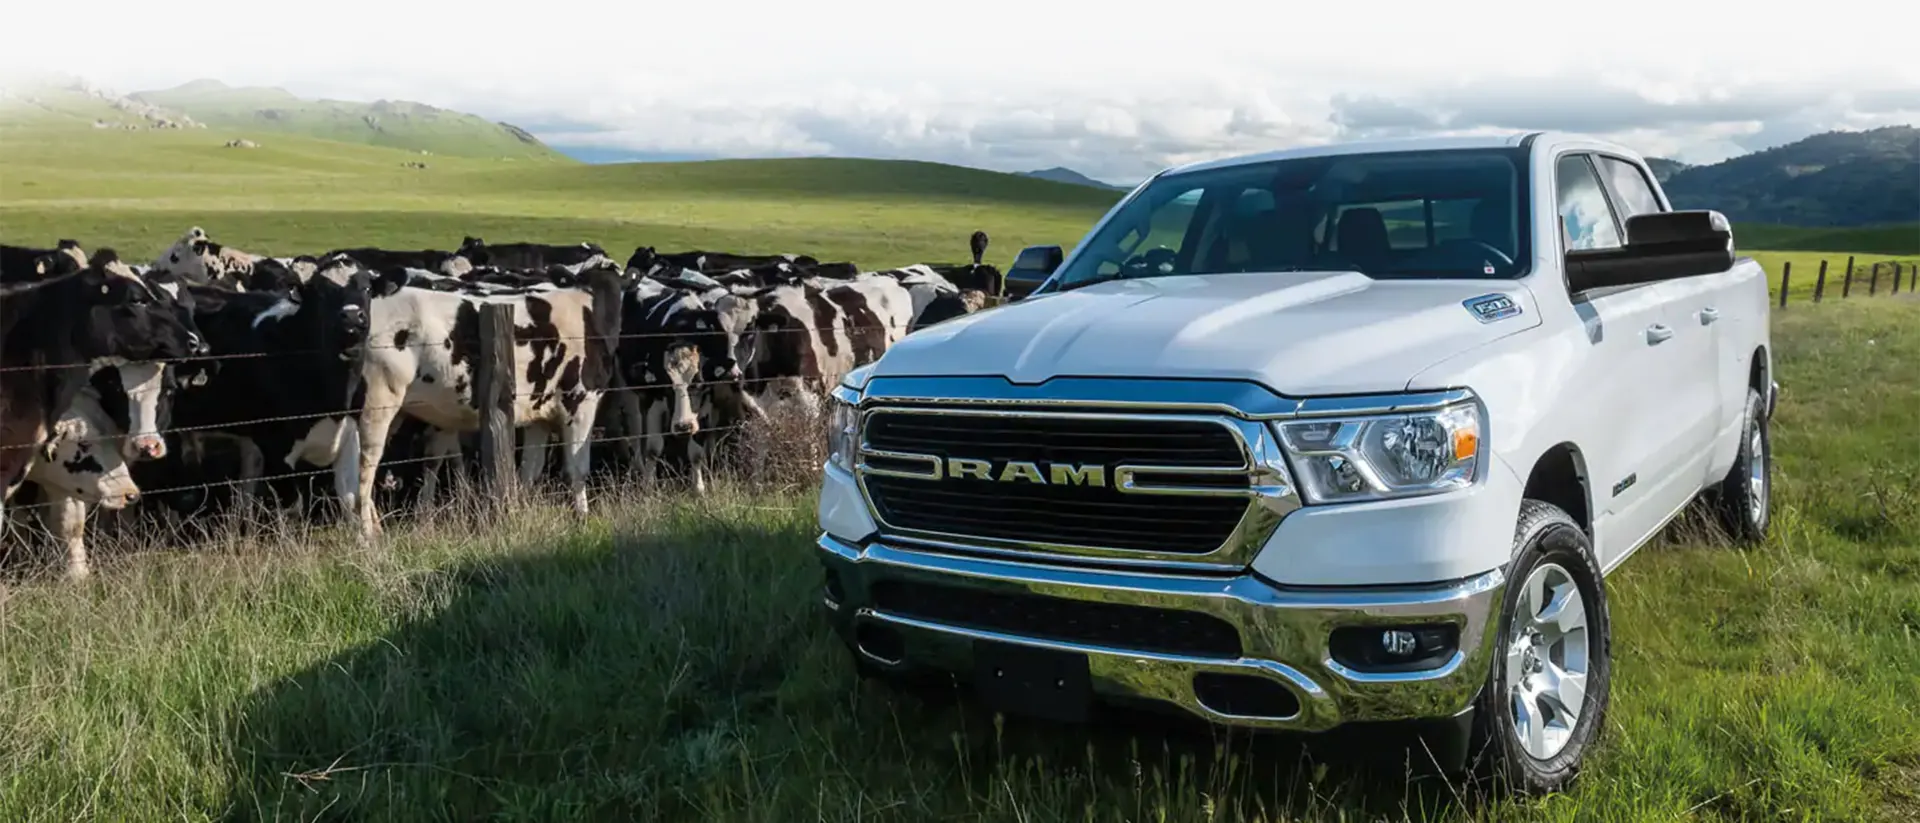 A picture of a Ram 1500 truck in an open field with clouds in the distance.